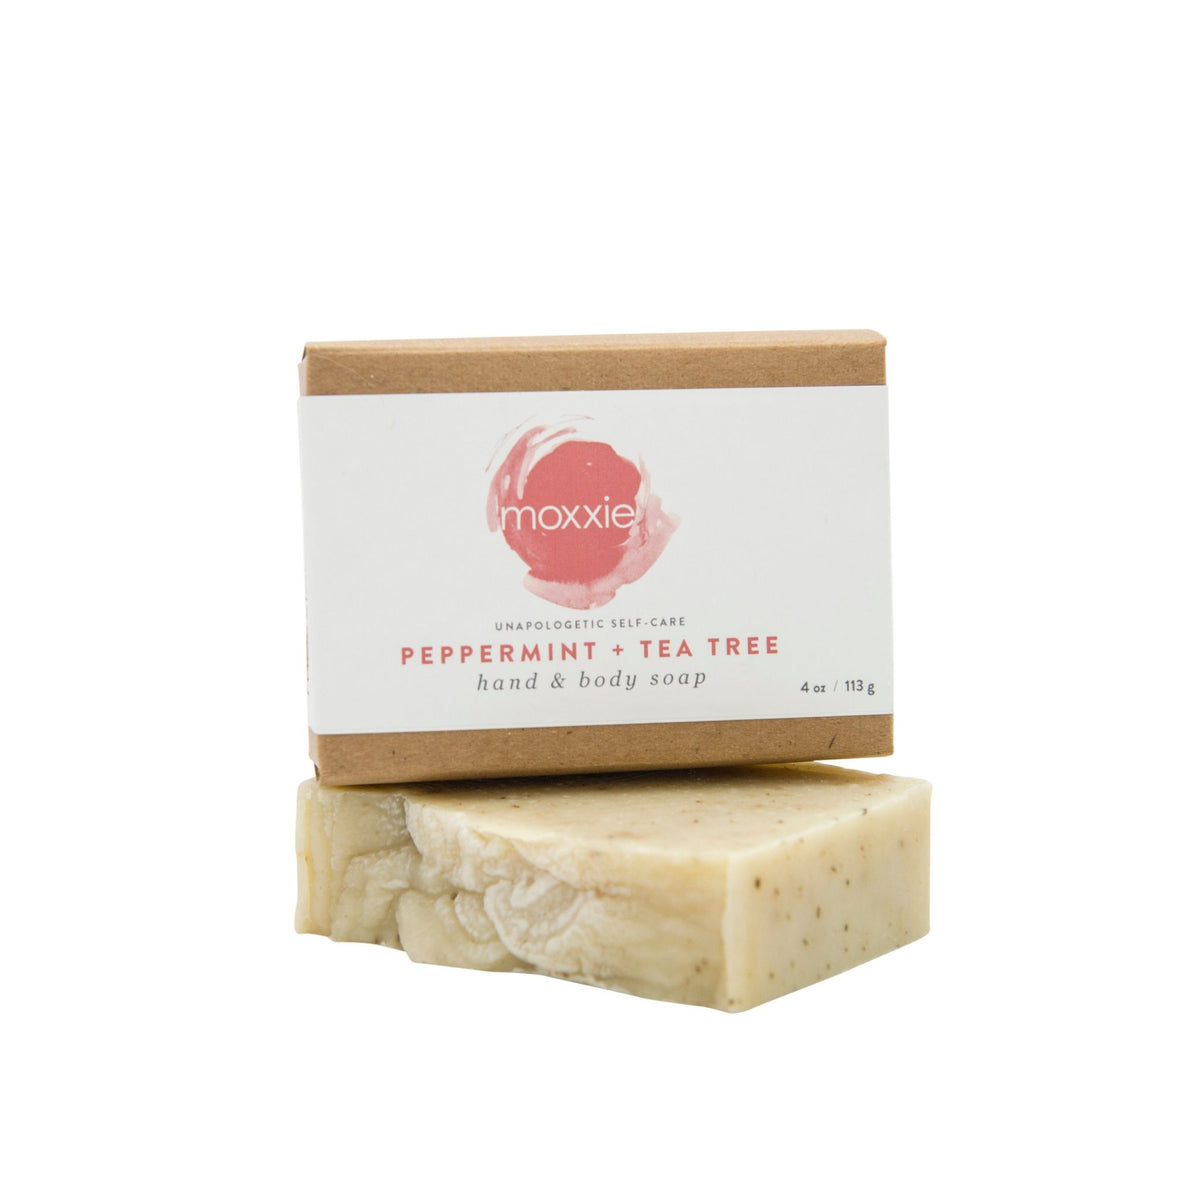 Moxxie all natural, handcrafted, 100% botanical Bar Soap - peppermint and tea tree